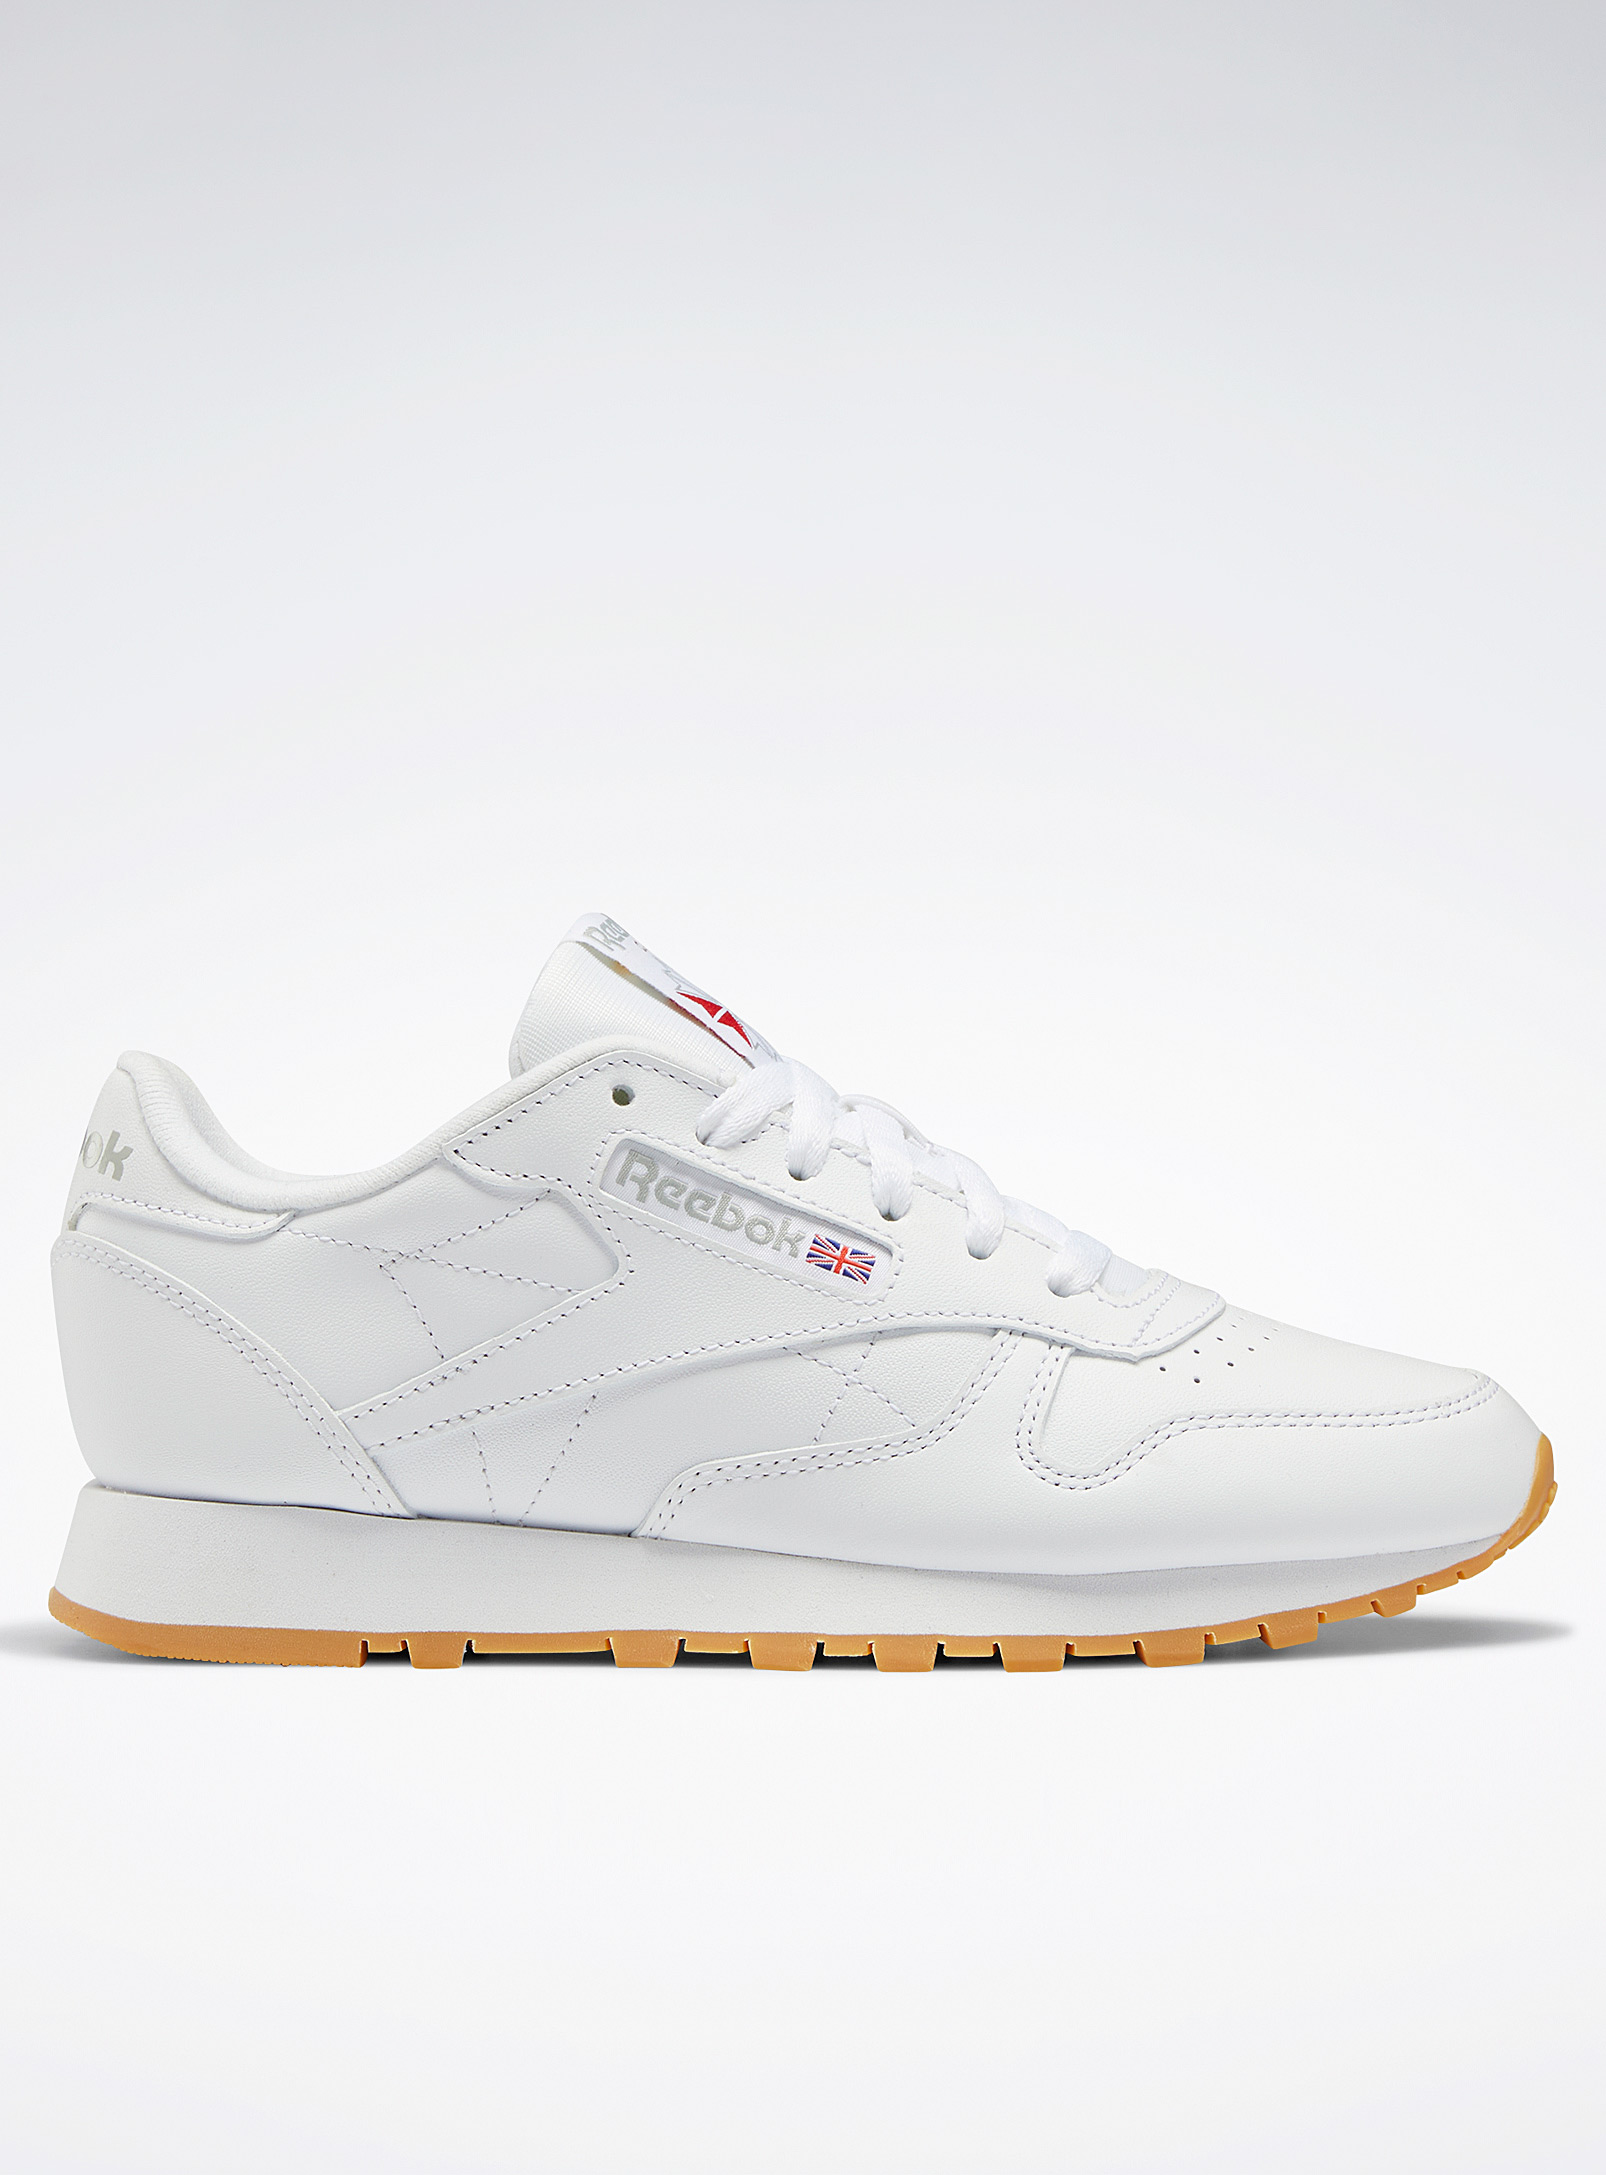 Reebok Classic Classic Leather Gum Sneakers Women In White